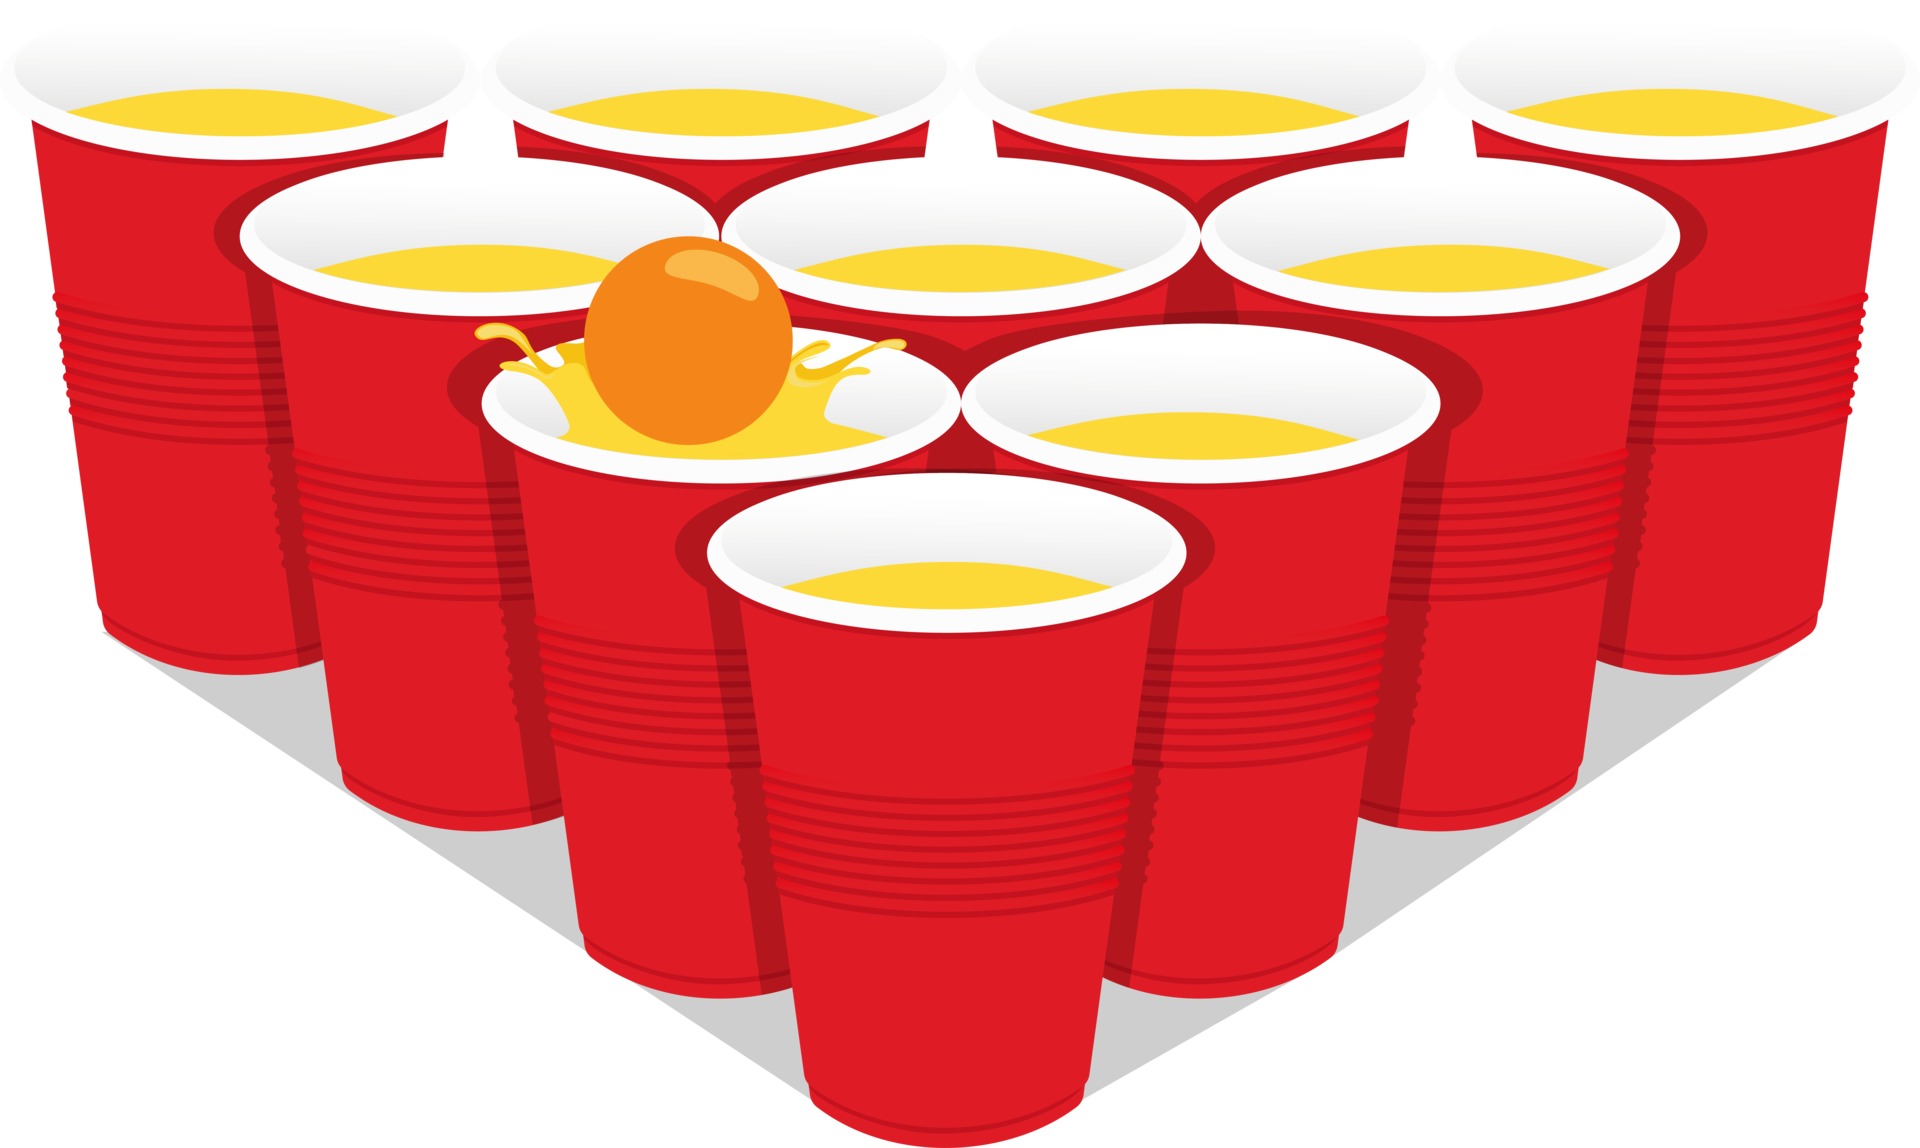 https://static.vecteezy.com/system/resources/previews/022/323/220/original/red-beer-pong-plastic-cups-and-ball-with-splashing-traditional-party-drinking-game-png.png